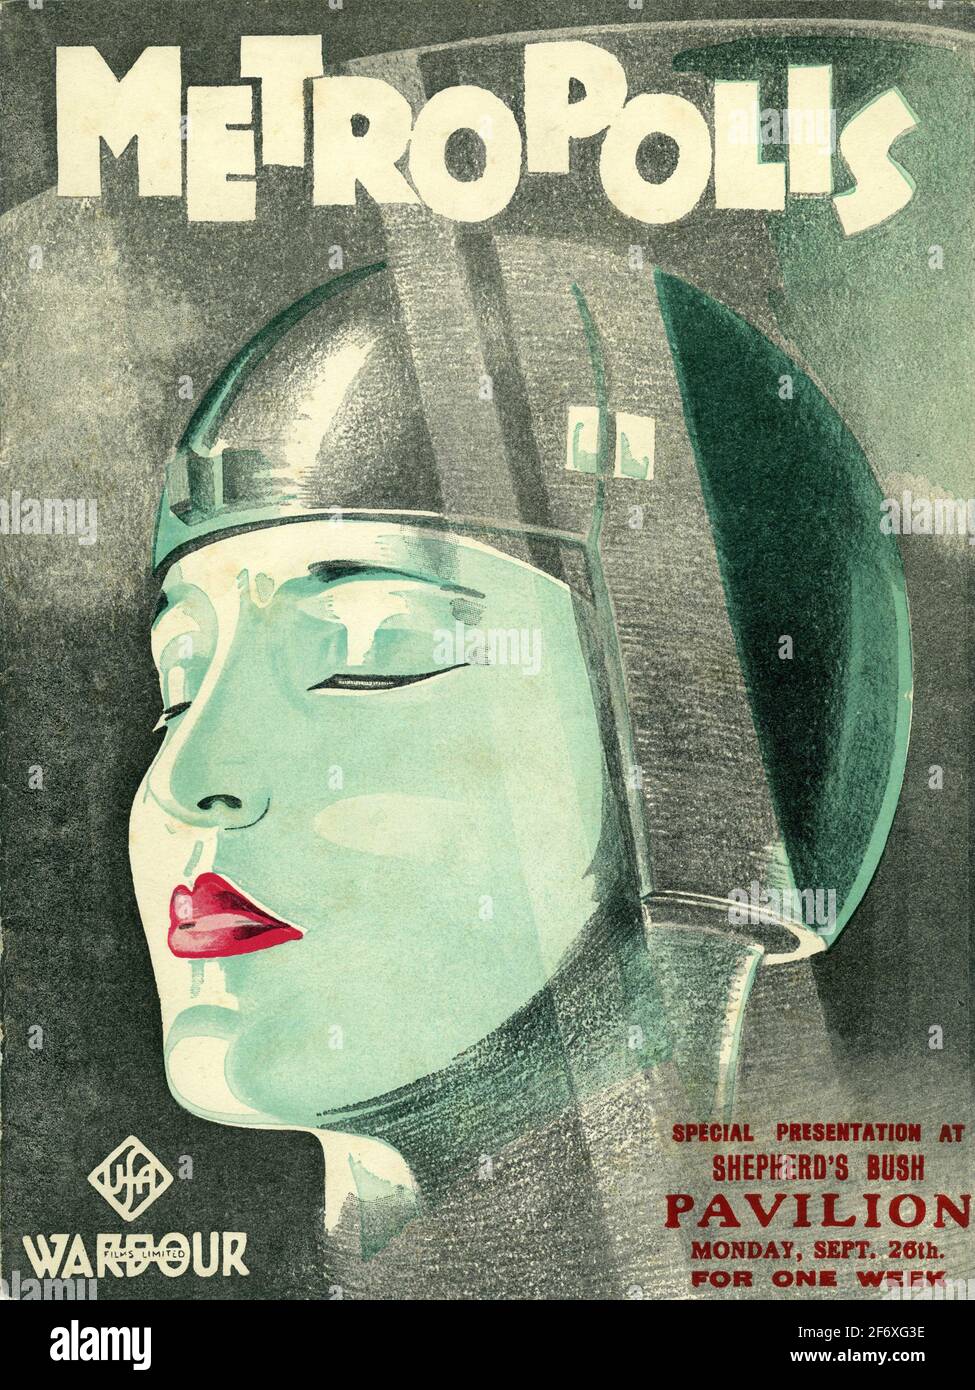 Front Cover of British Original Release Programme with artwork of BRIGITTE HELM as Maria / The Robot in METROPOLIS 1927 director FRITZ LANG novel and screenplay Thea von Harbou Universum Film (UFA) Stock Photo